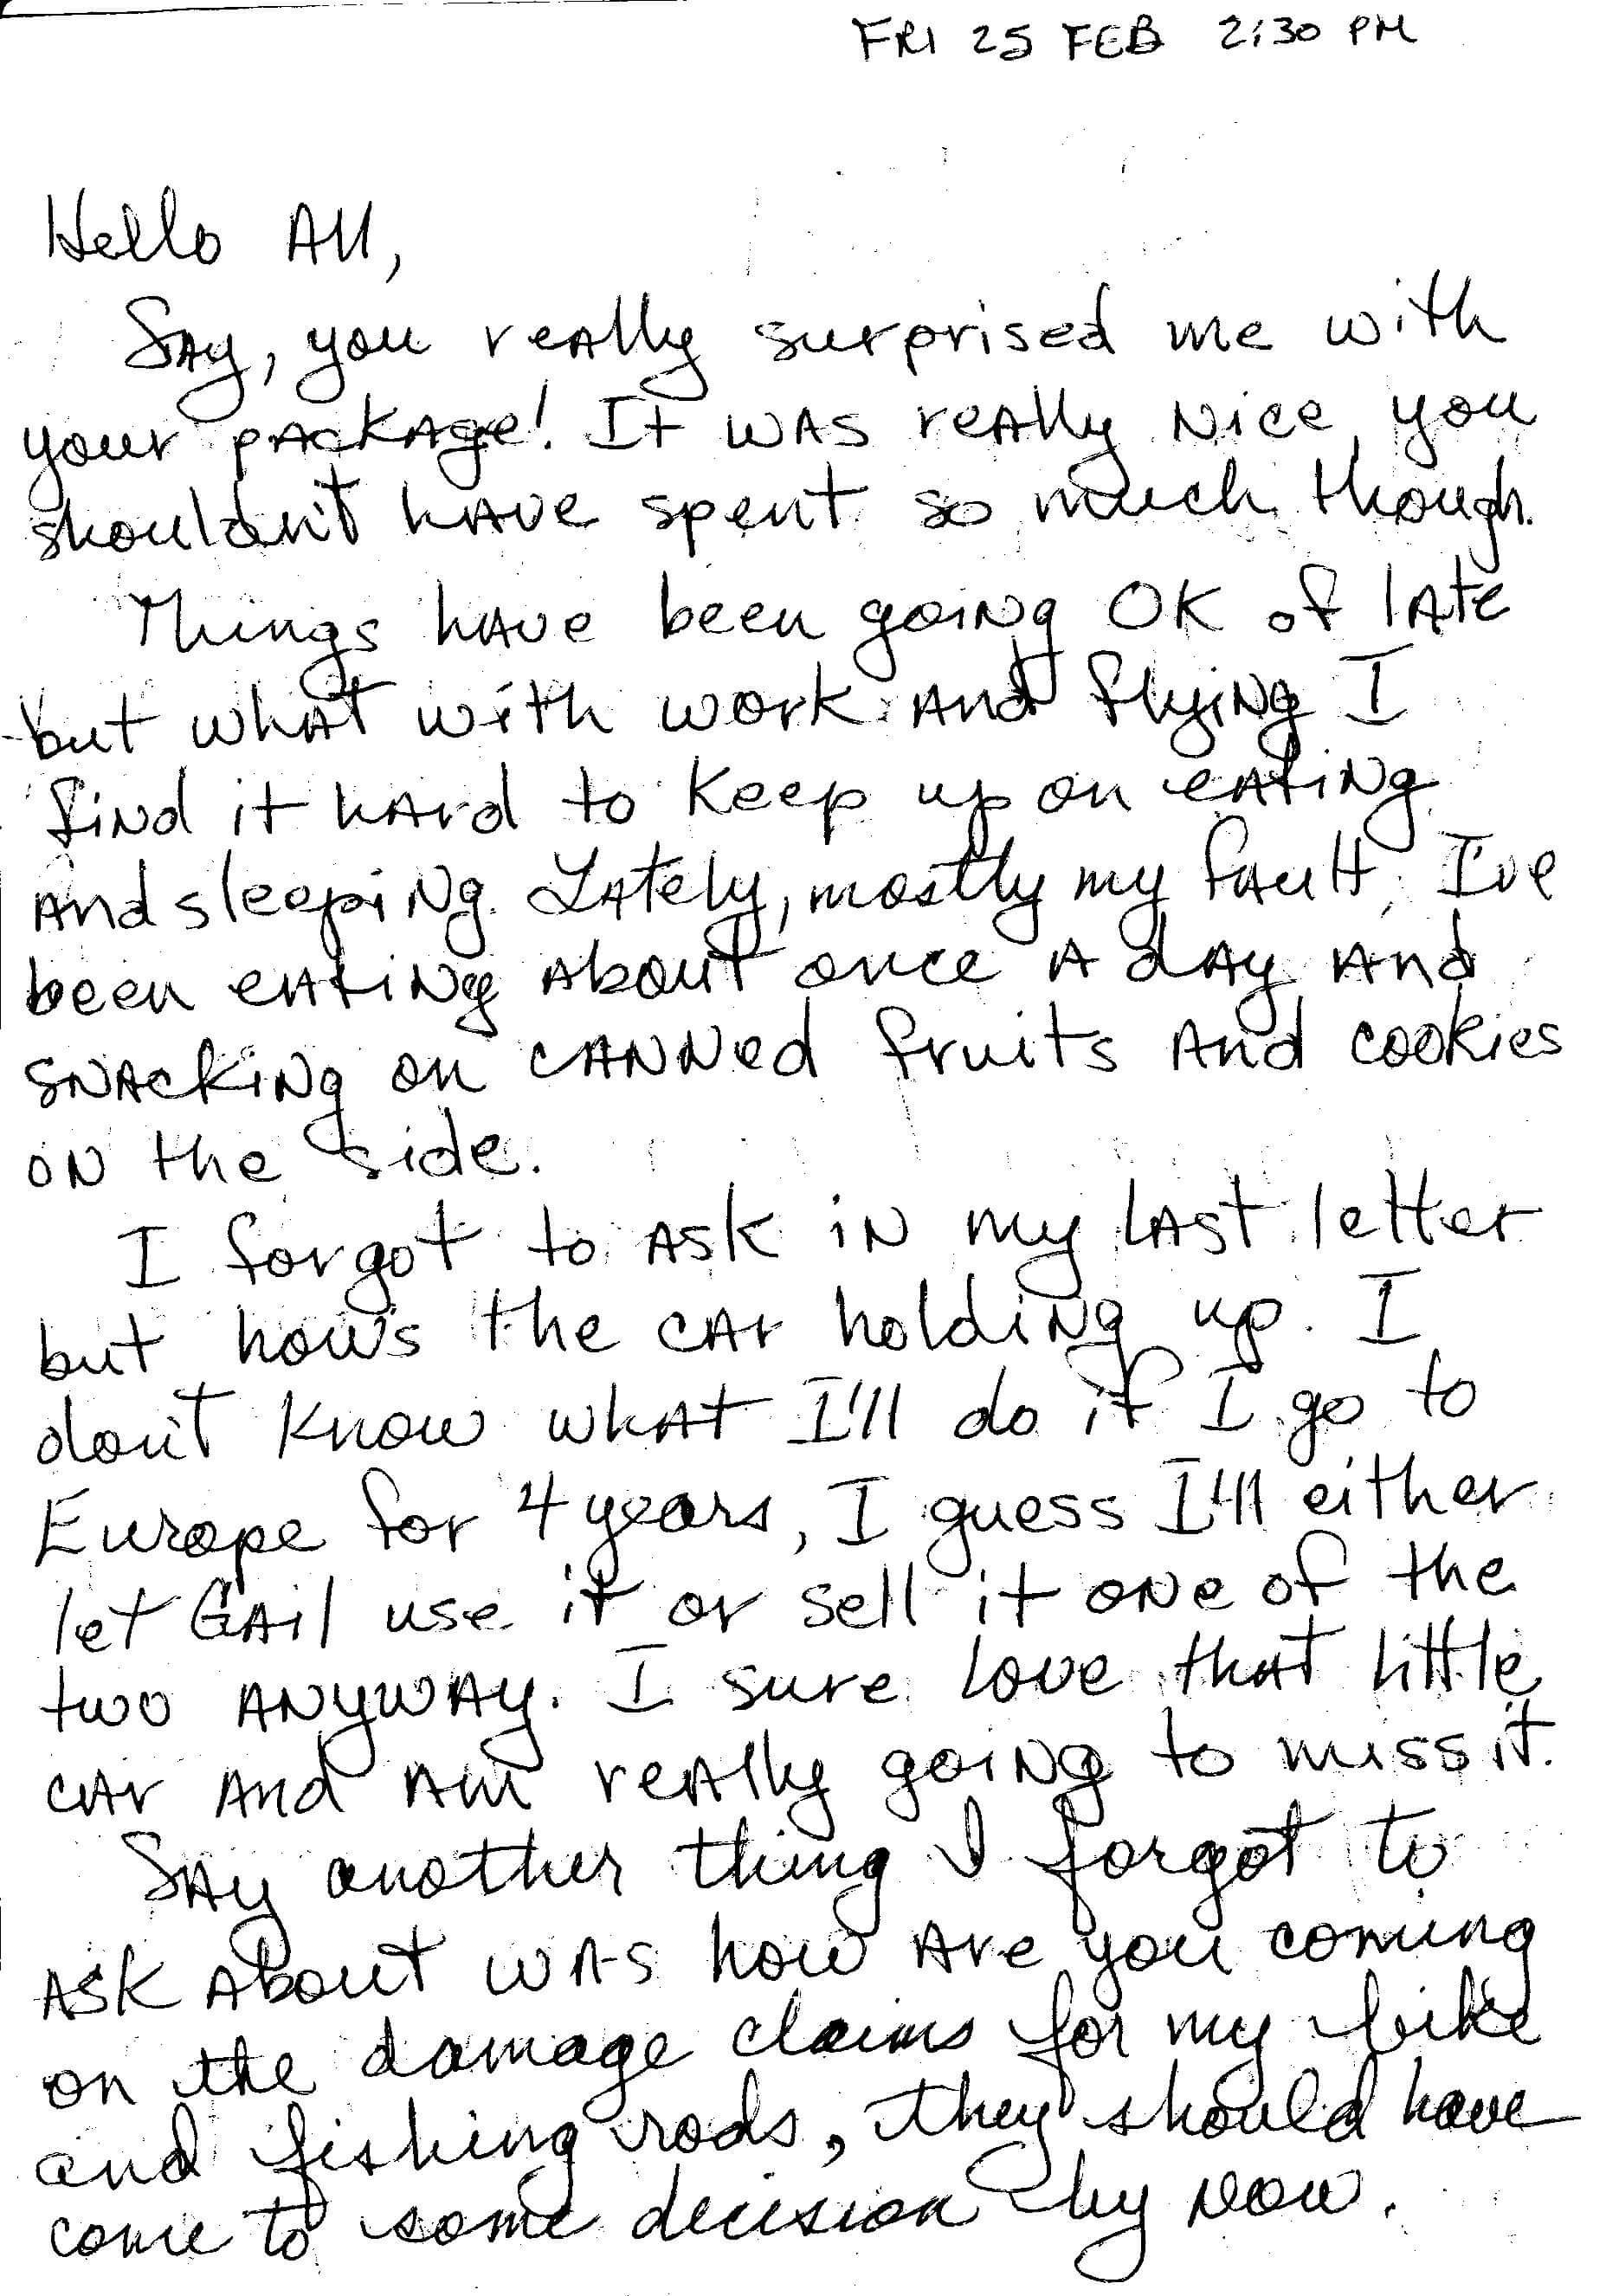 Page 1 of a letter home.